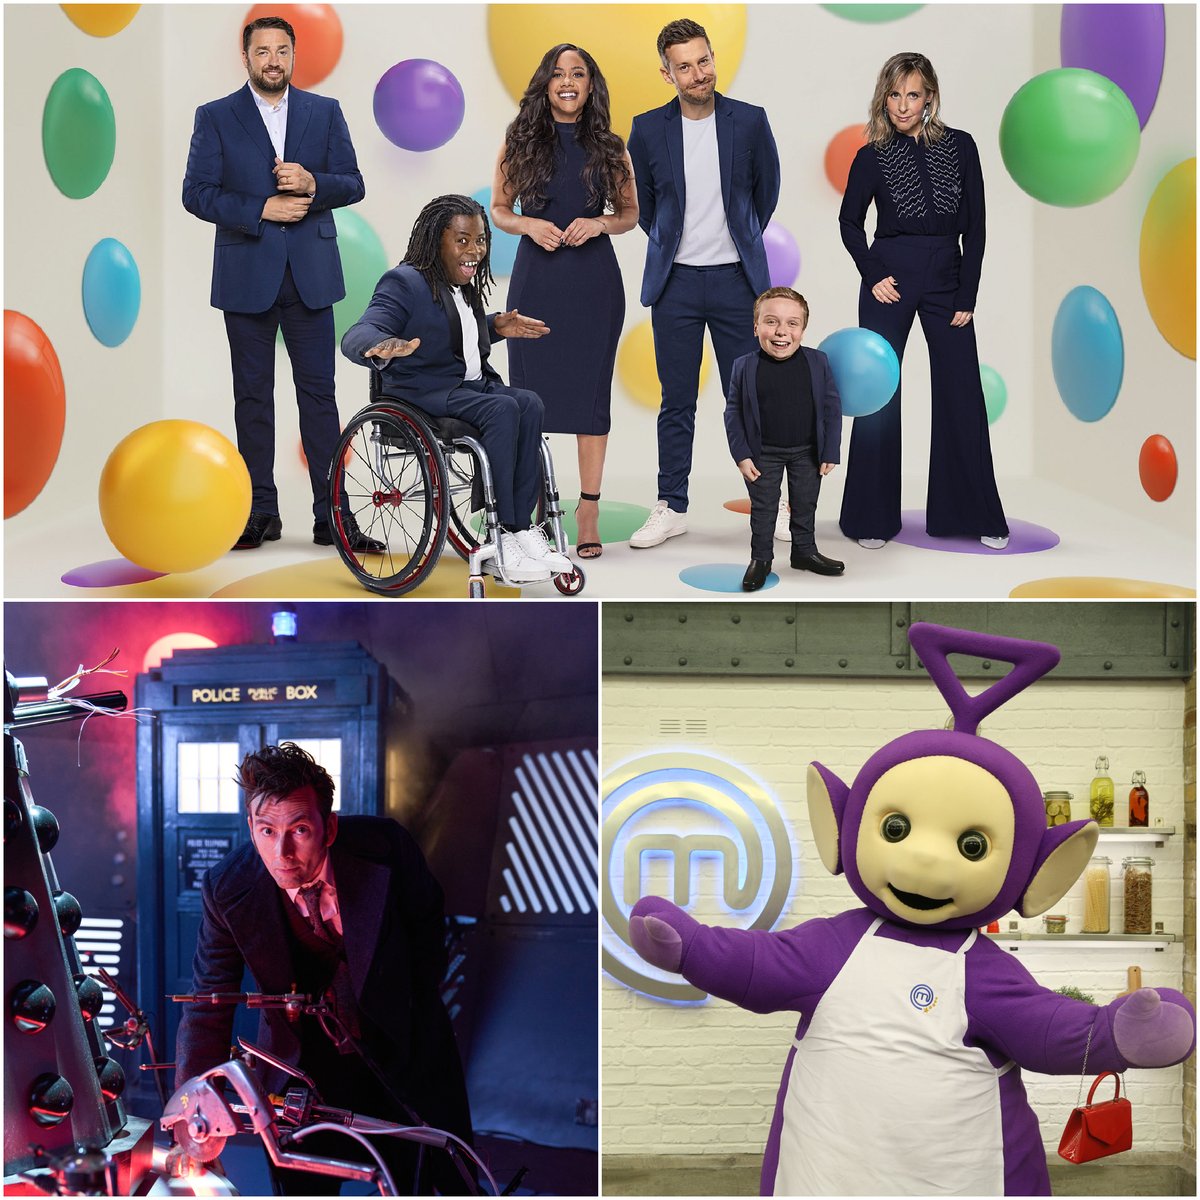 🎉 From a #DoctorWho treat featuring David Tennant, to Tinky-Winky and a whole host of puppets in the MasterChef kitchen, there's a LOT happening on Children in Need's TV spectacular across @BBCOne and @BBCiPlayer Get all the info ➡️ bbc.in/46pfrHc